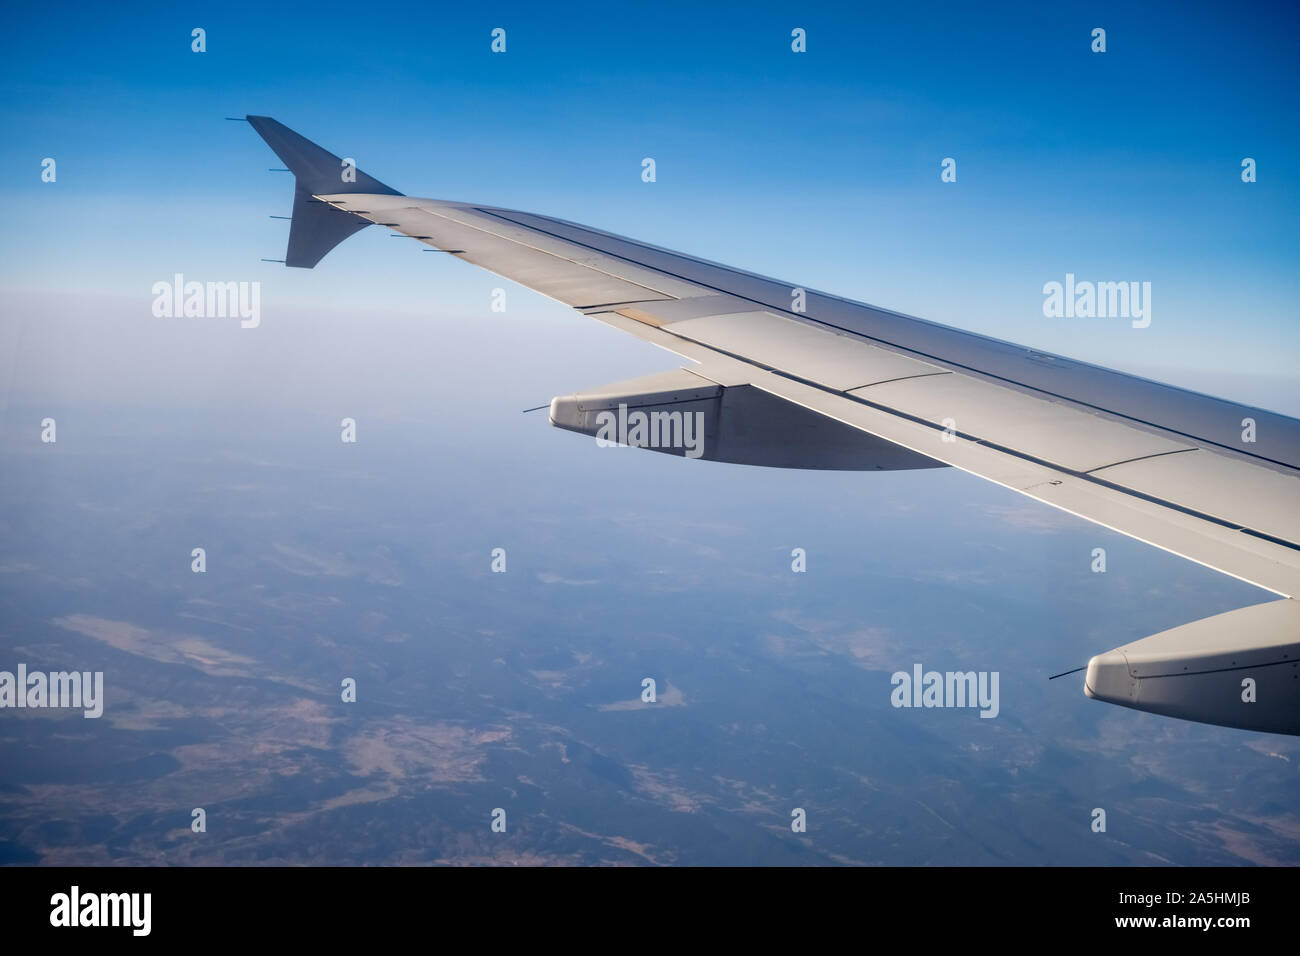 Looking through aircraft window during flight. Aircraft wing over blue skies and pyrenees mountains.Copy space. Stock Photo